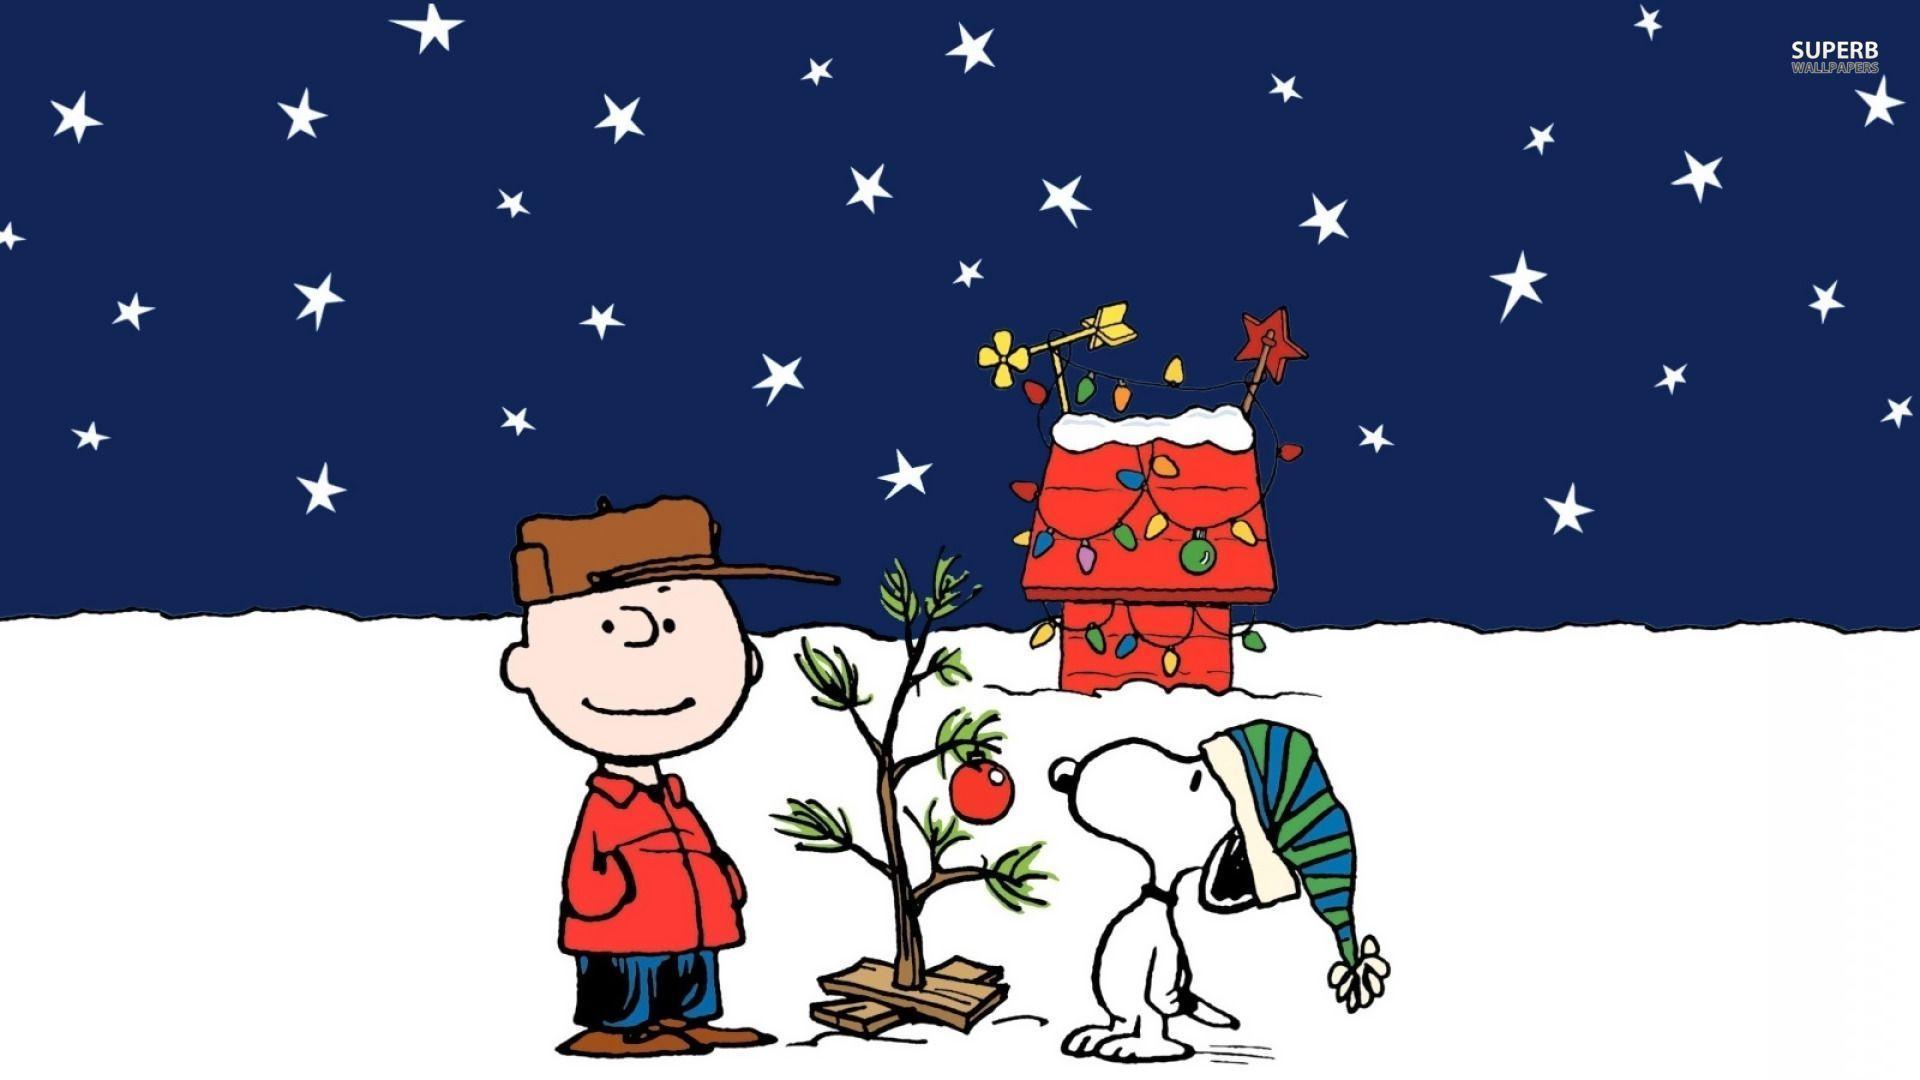 Wallpapers For > Charlie Brown Snoopy Christmas Wallpapers